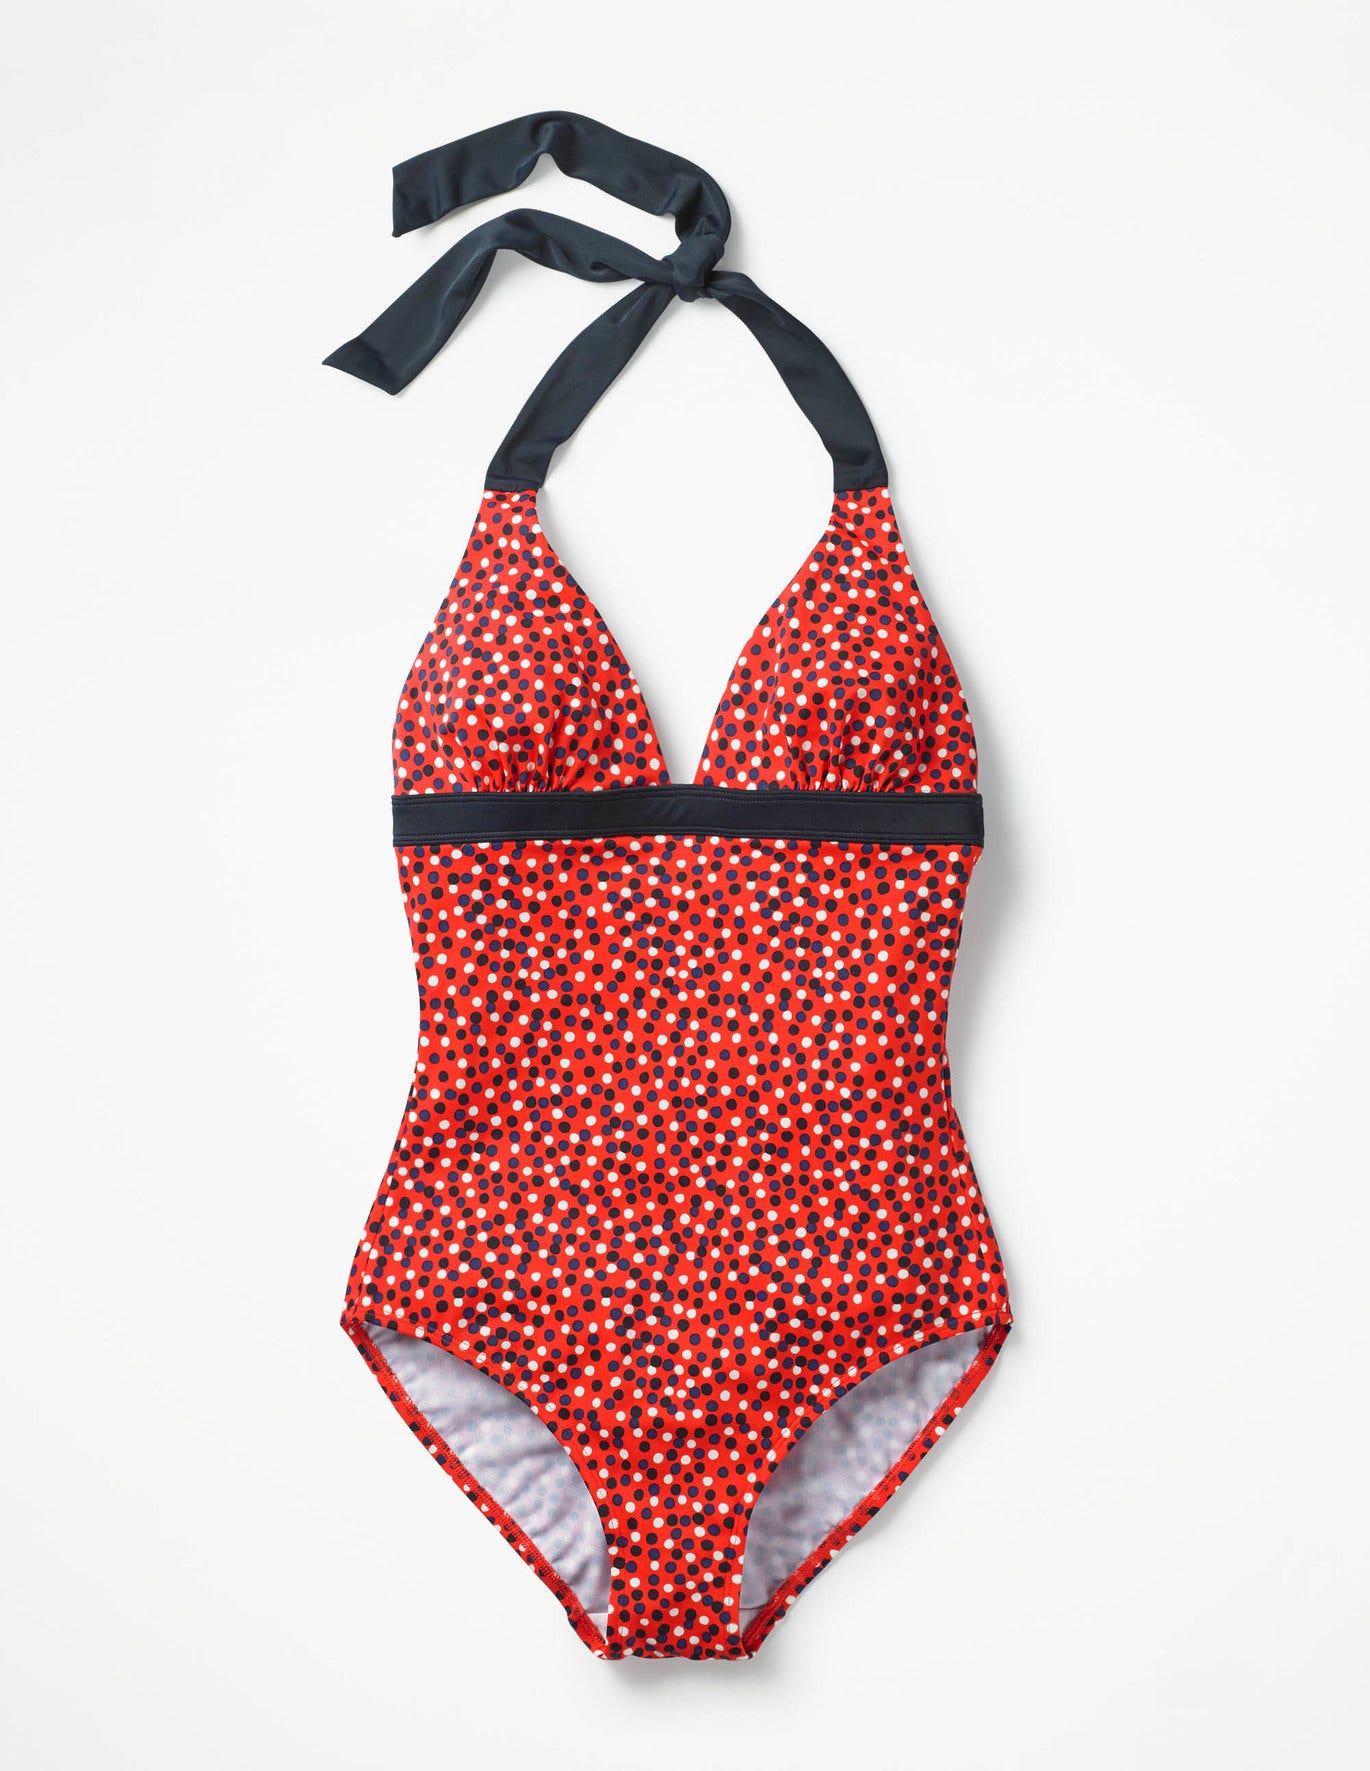 10. Positano Swimsuit by Boden.